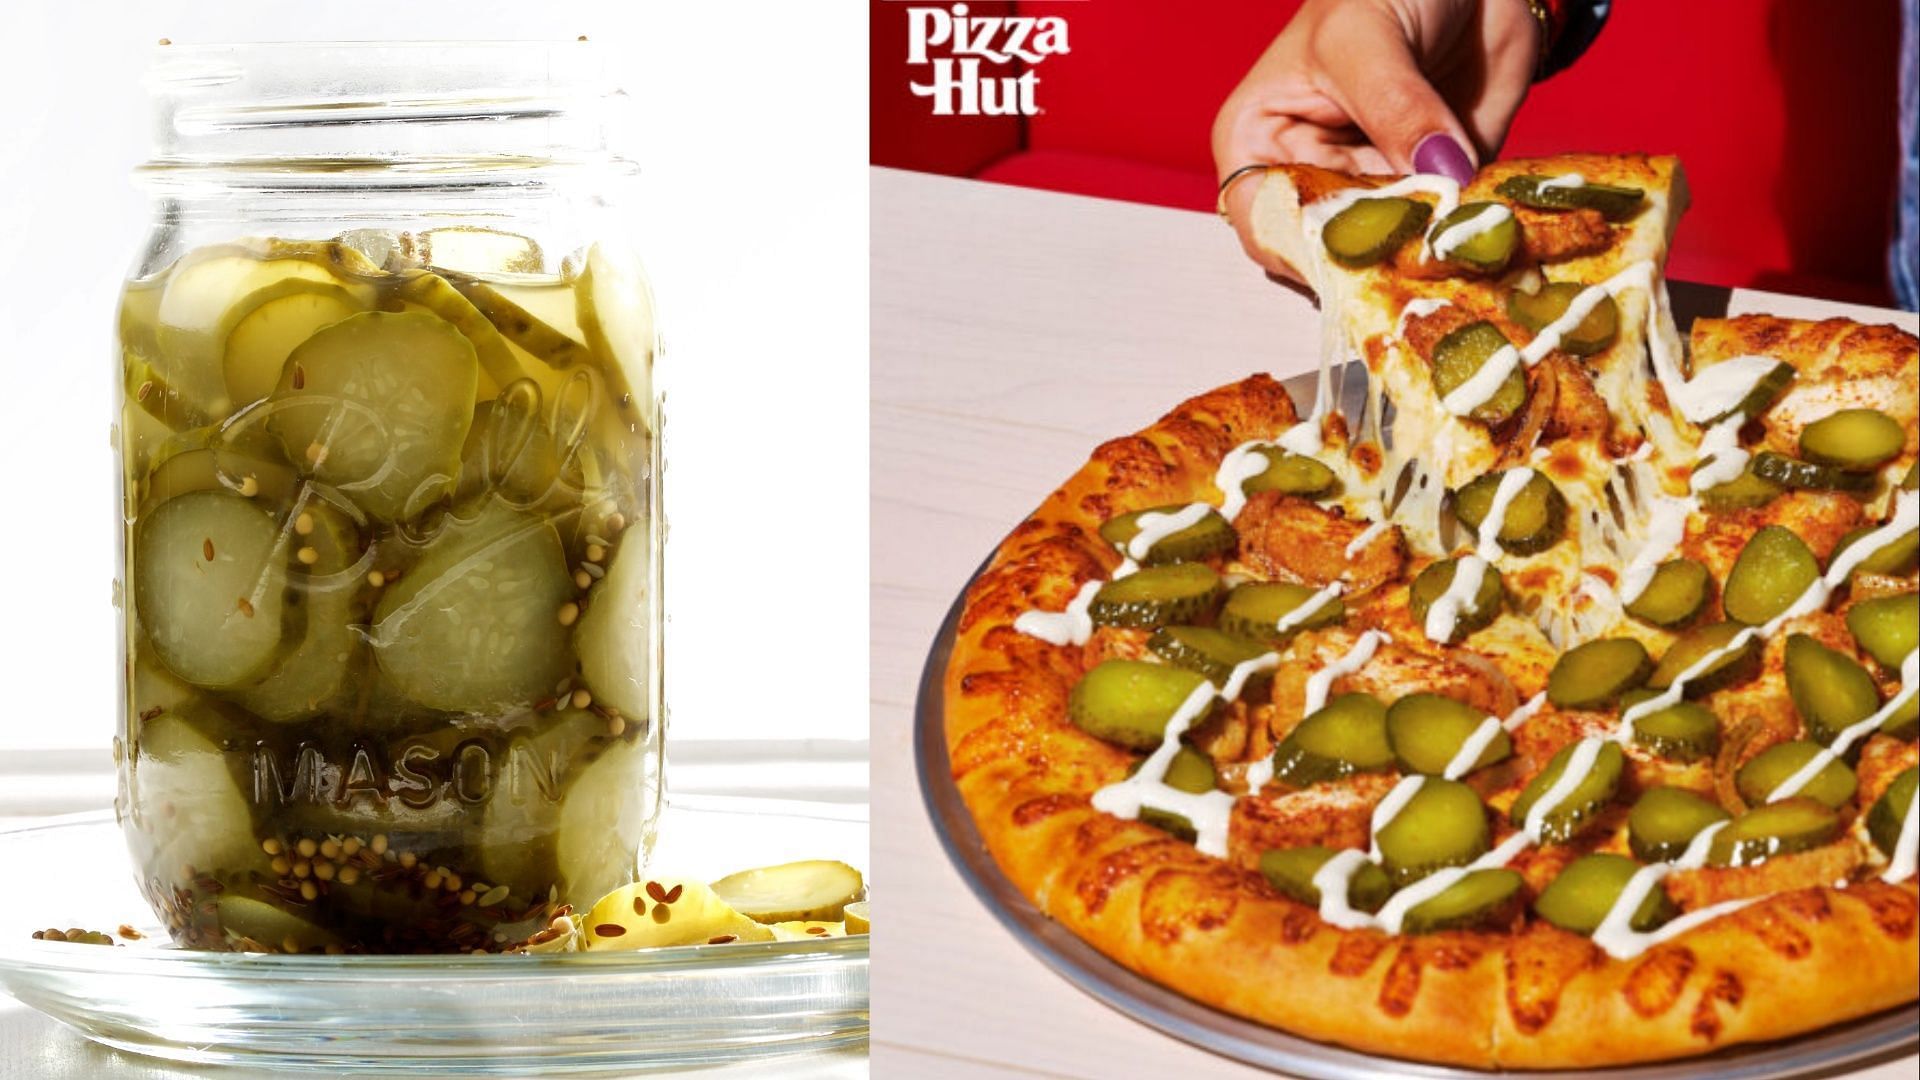 The new Pickle Pizza will be available at a single location between June 9 and June 11 (Image via Deb Lindsey/ Getty Images/ Pizza Hut)